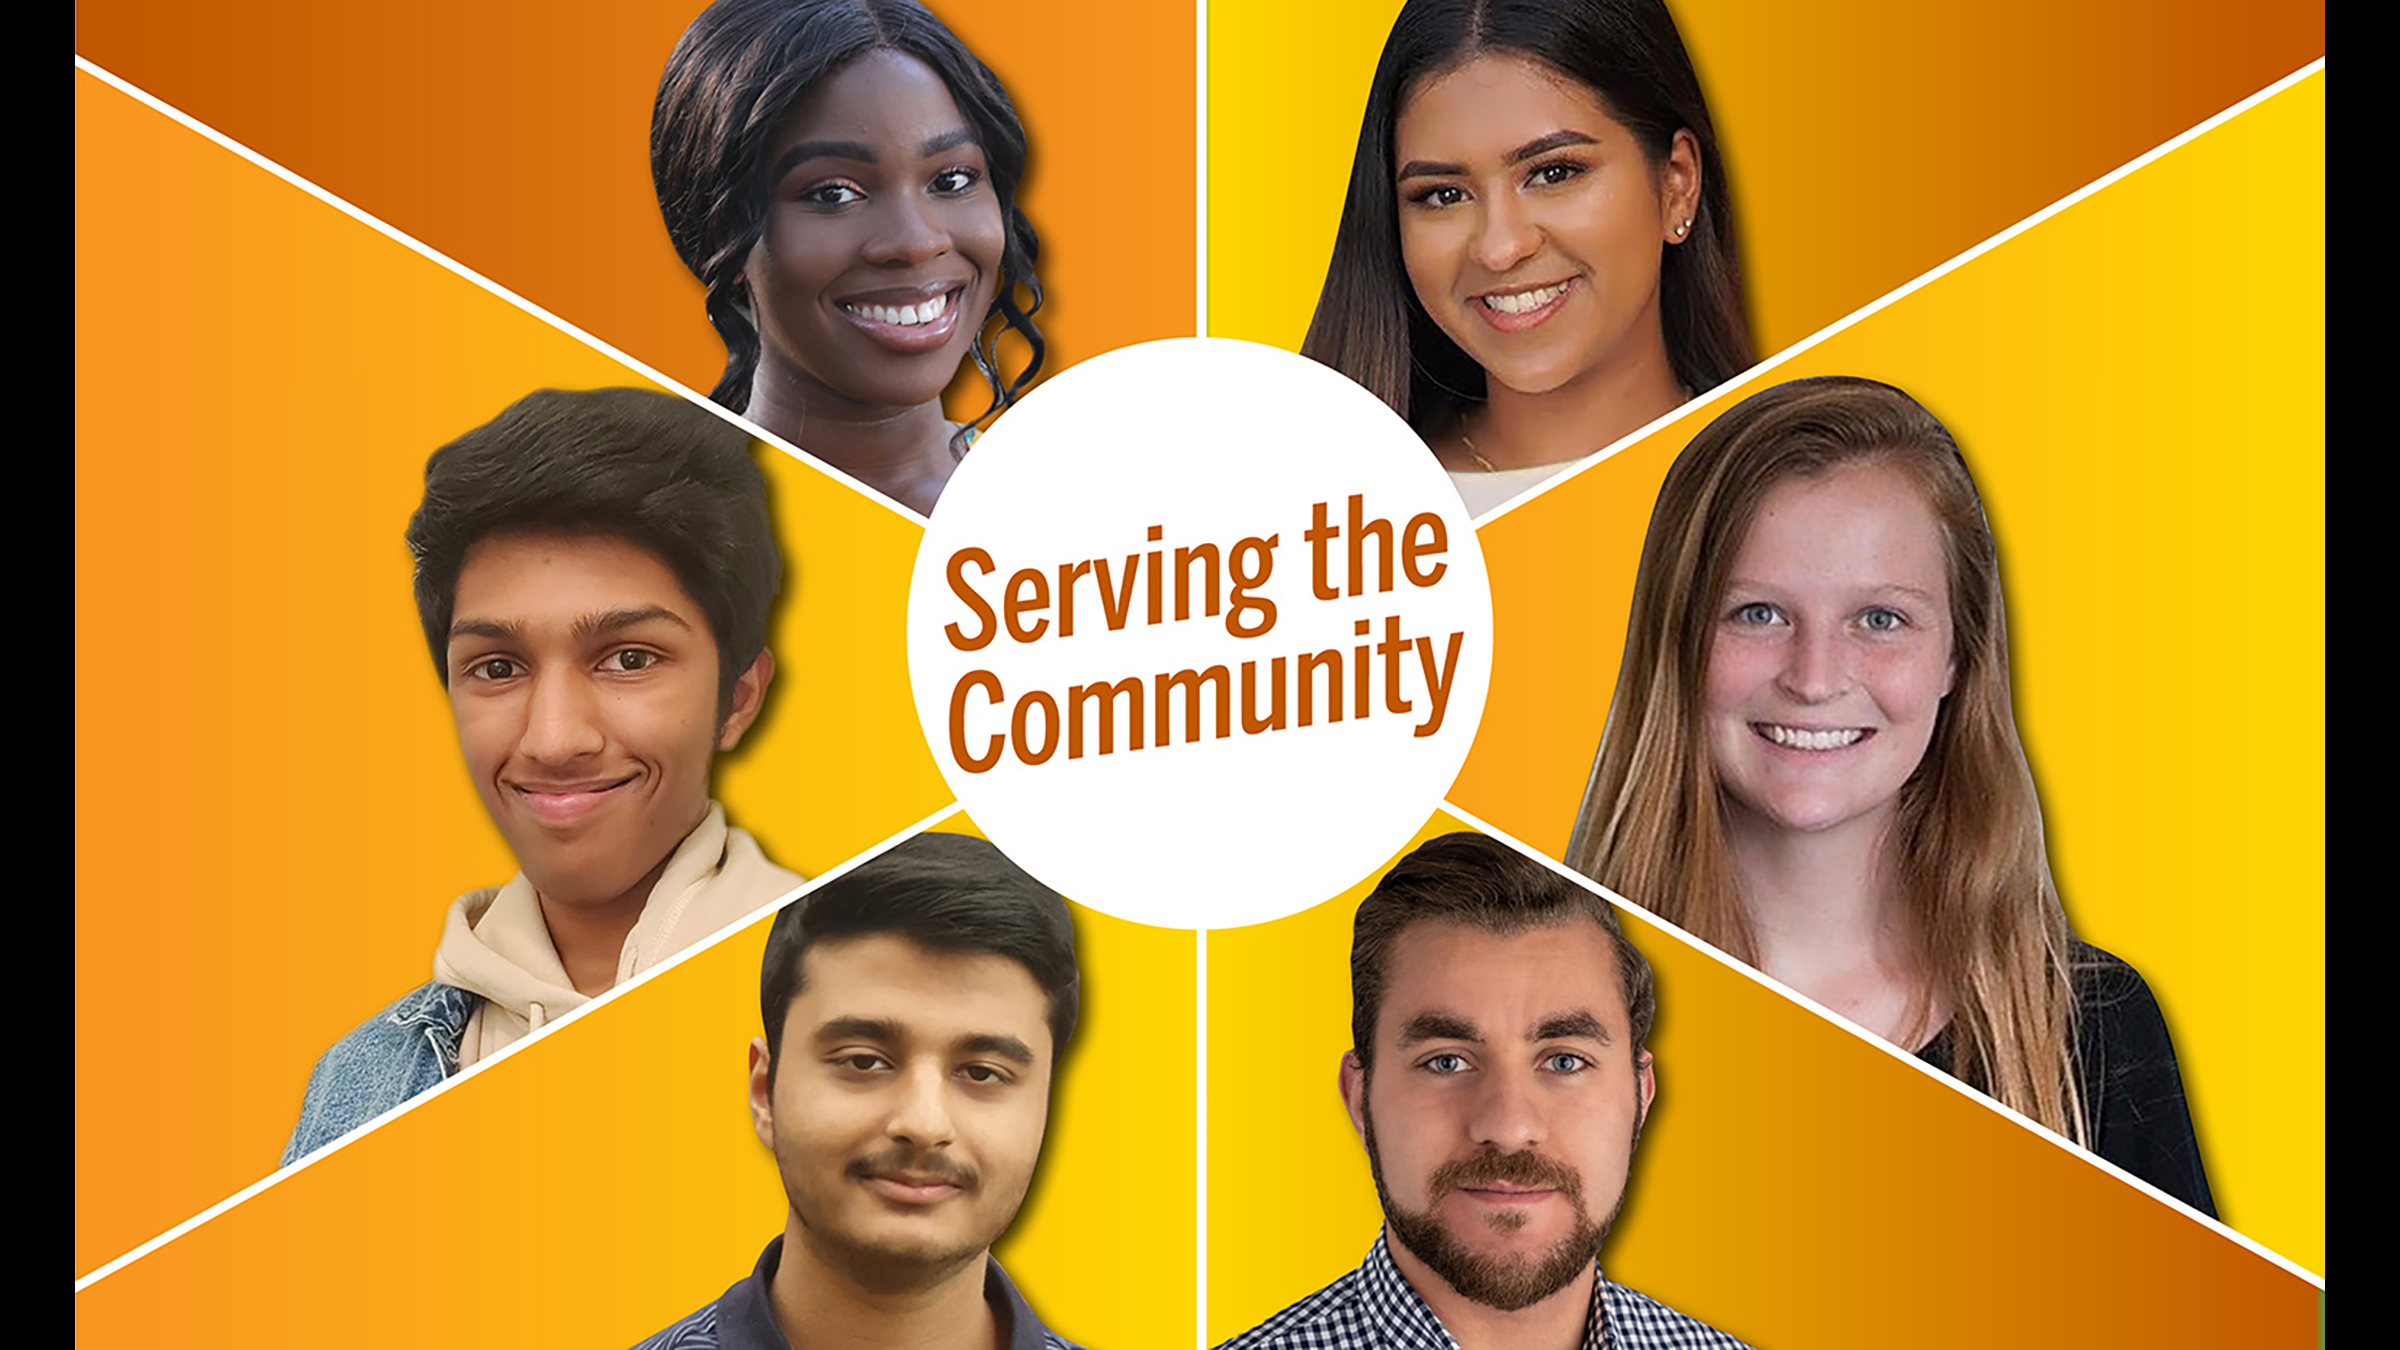 A composite portrait of 6 students with the words "Serving the Community"